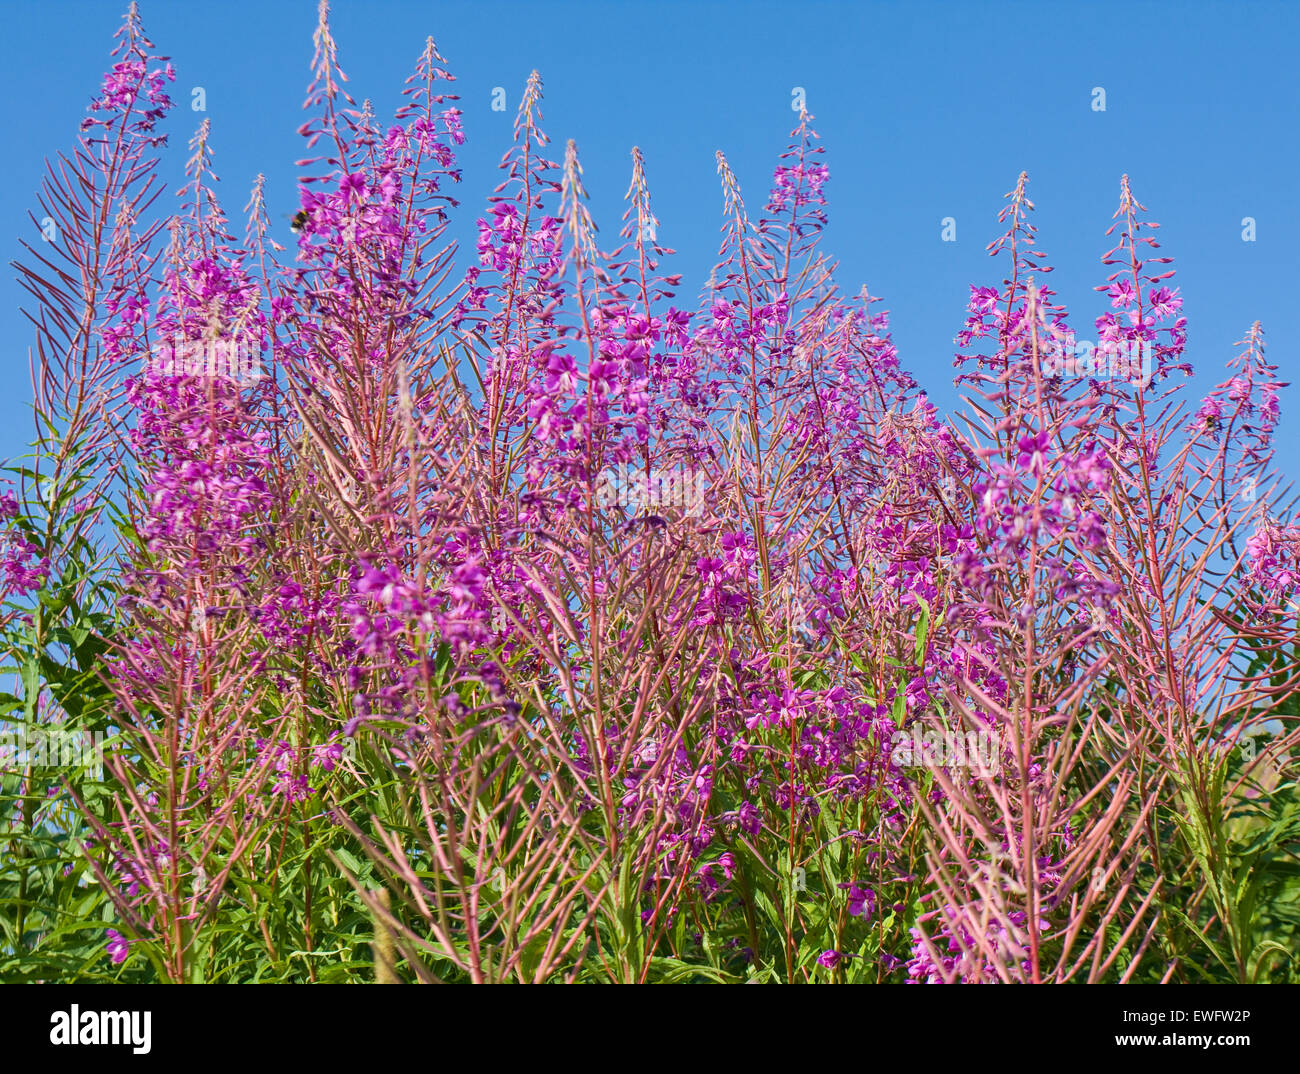 Many wild flowers willow herb on blue sky. Stock Photo